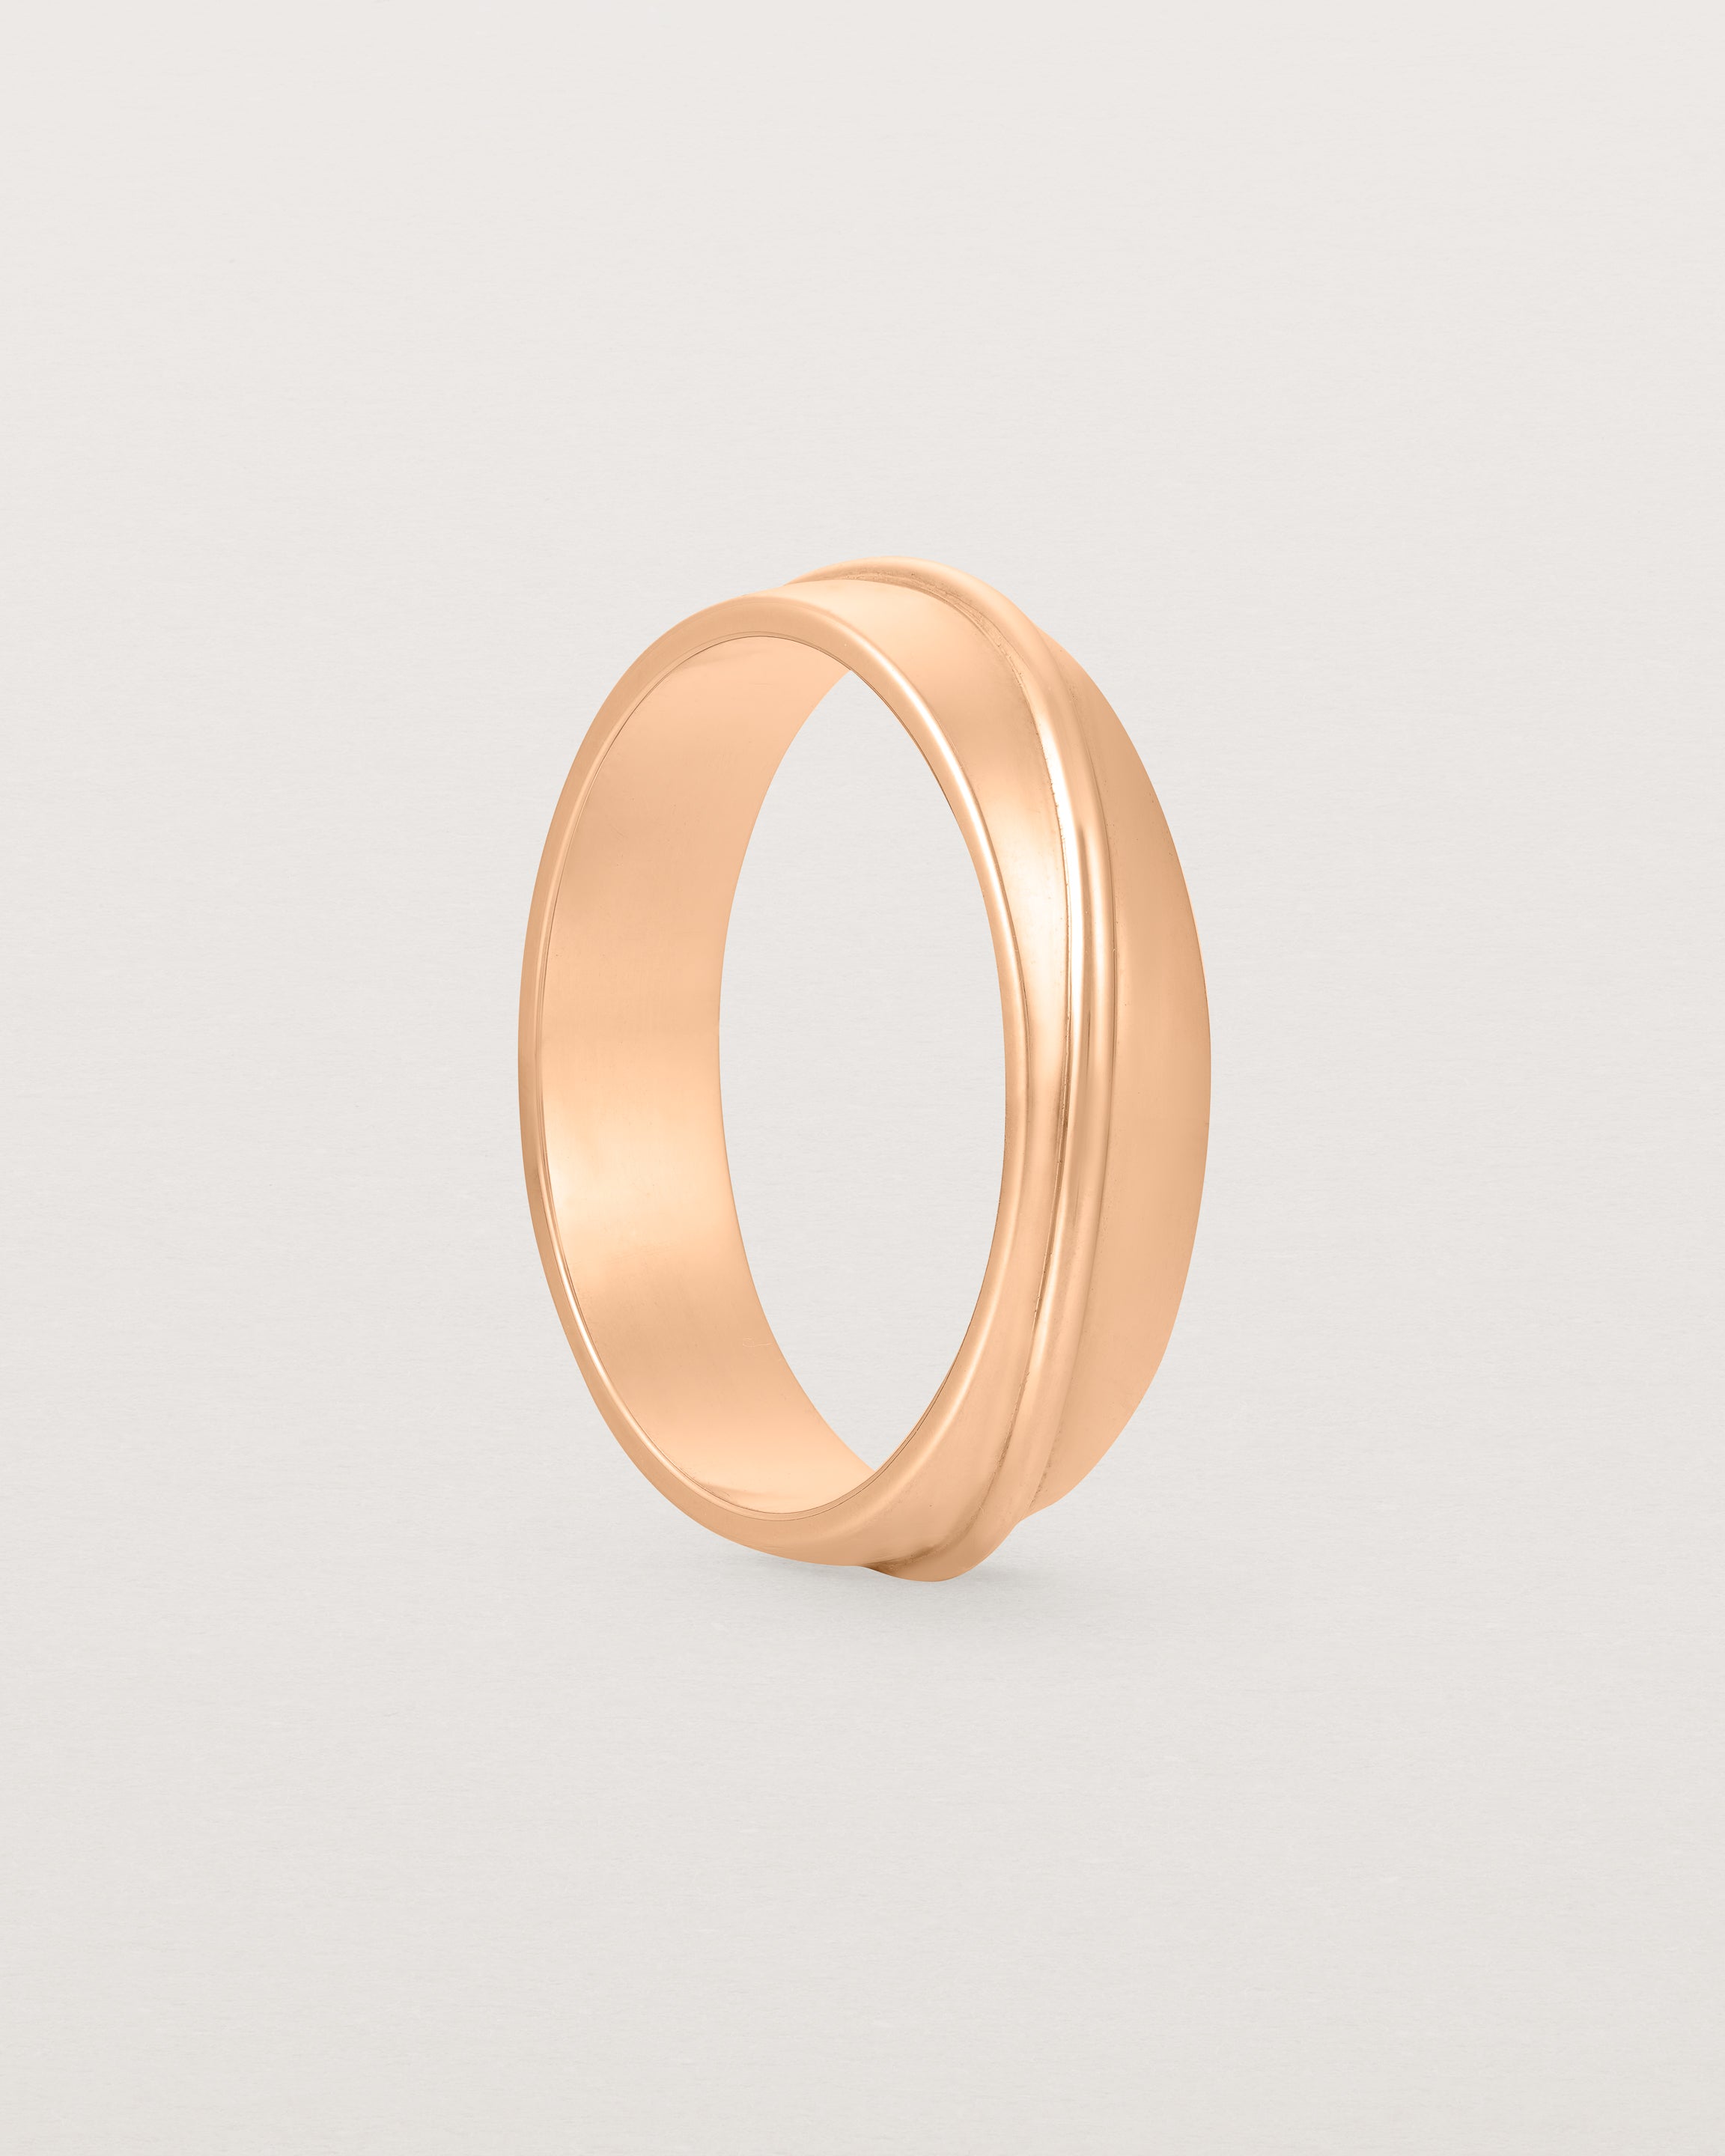 Standing view of the Surge Wedding Ring | 5mm | Rose Gold.